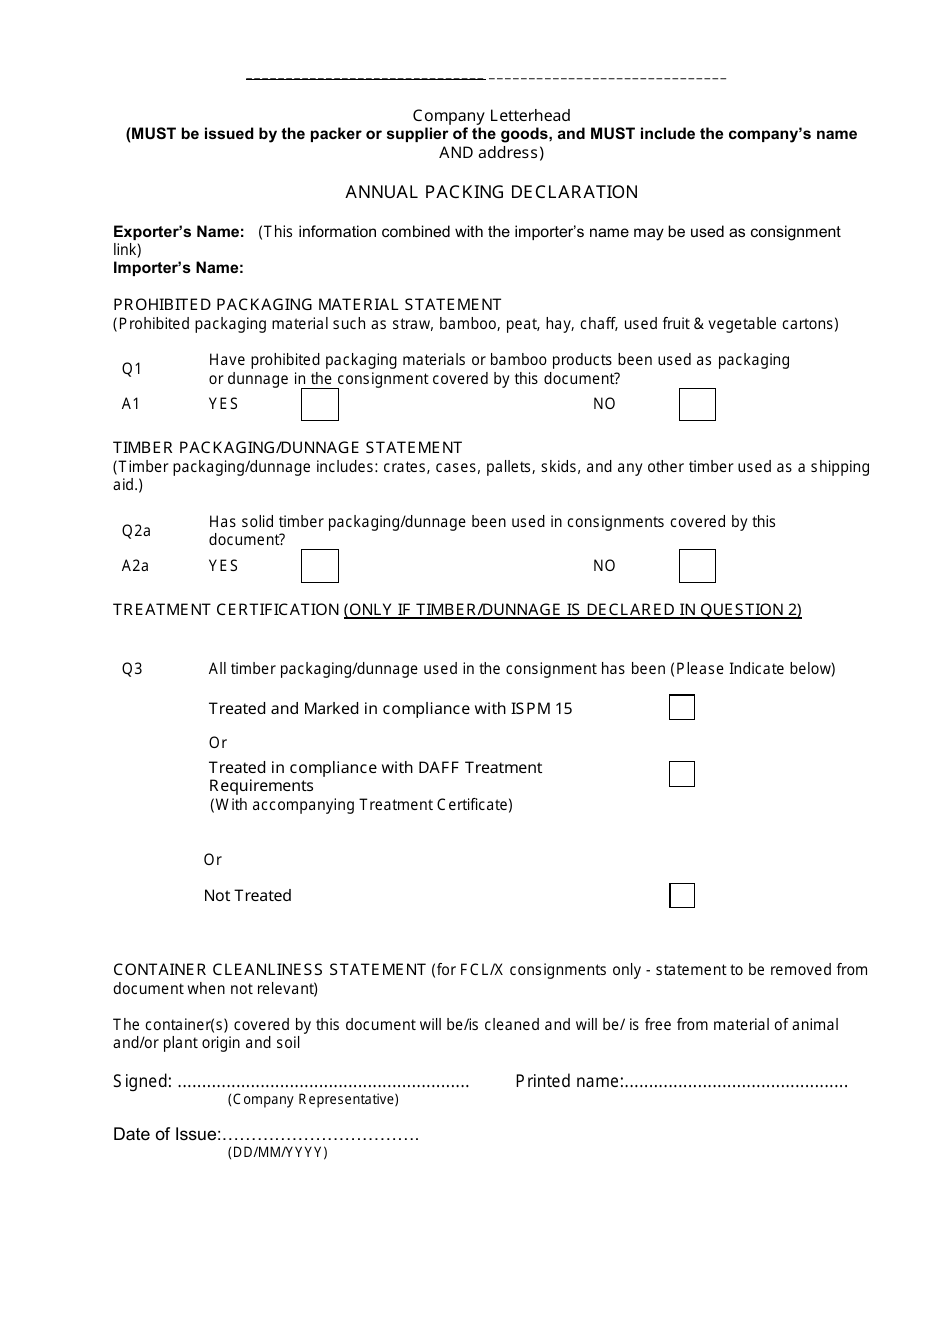 Annual Packing Declaration Form, Page 1